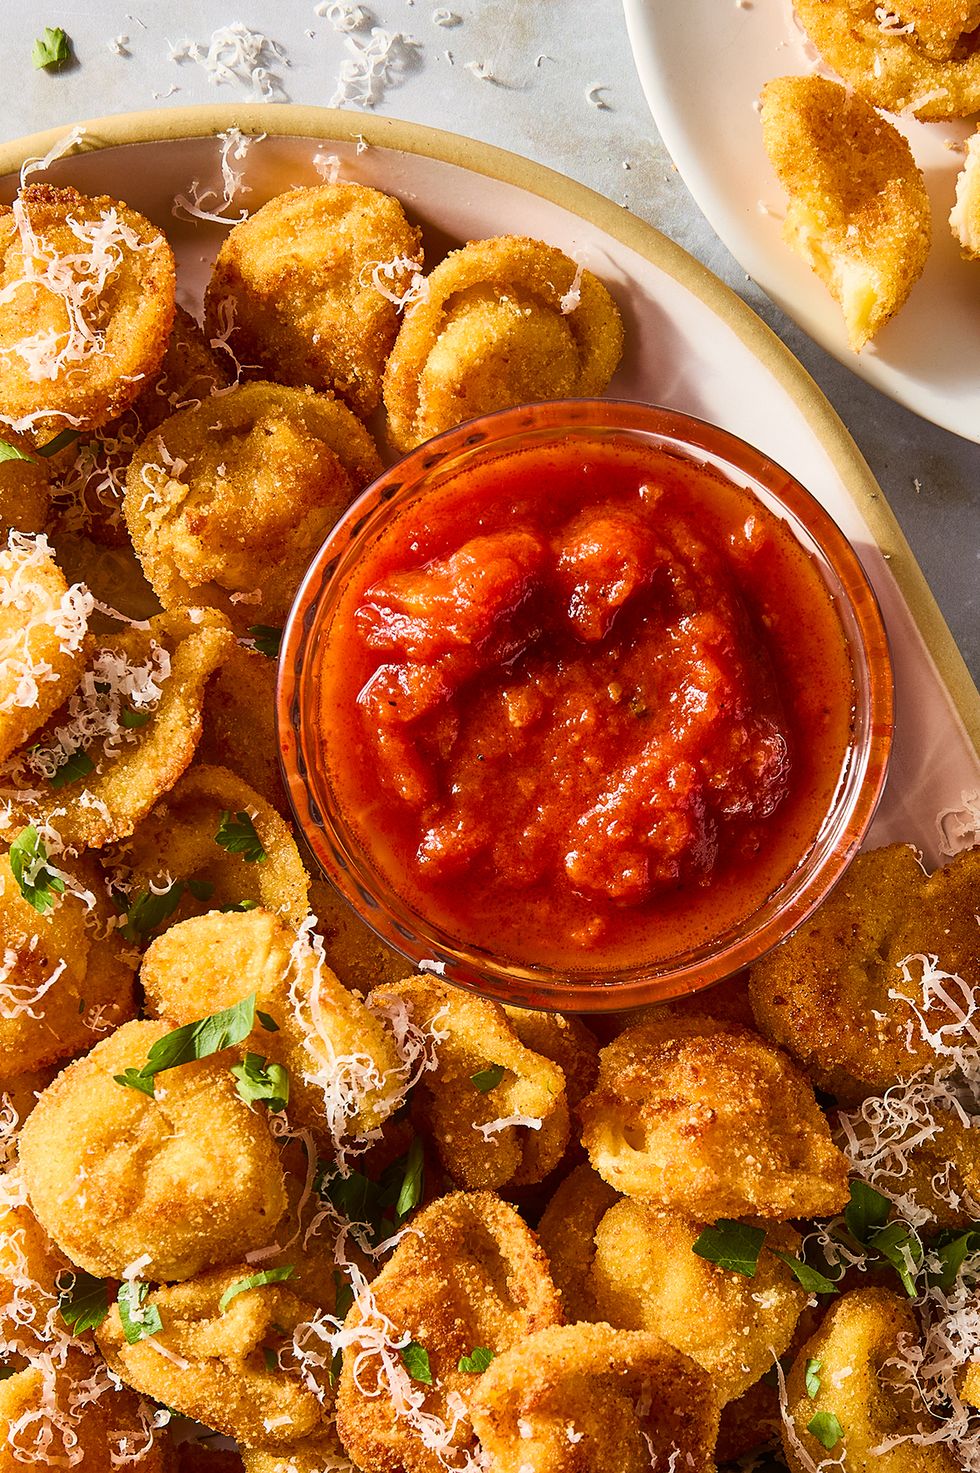 fried bites of tortellini topped with parmesan and served with marinara sauce